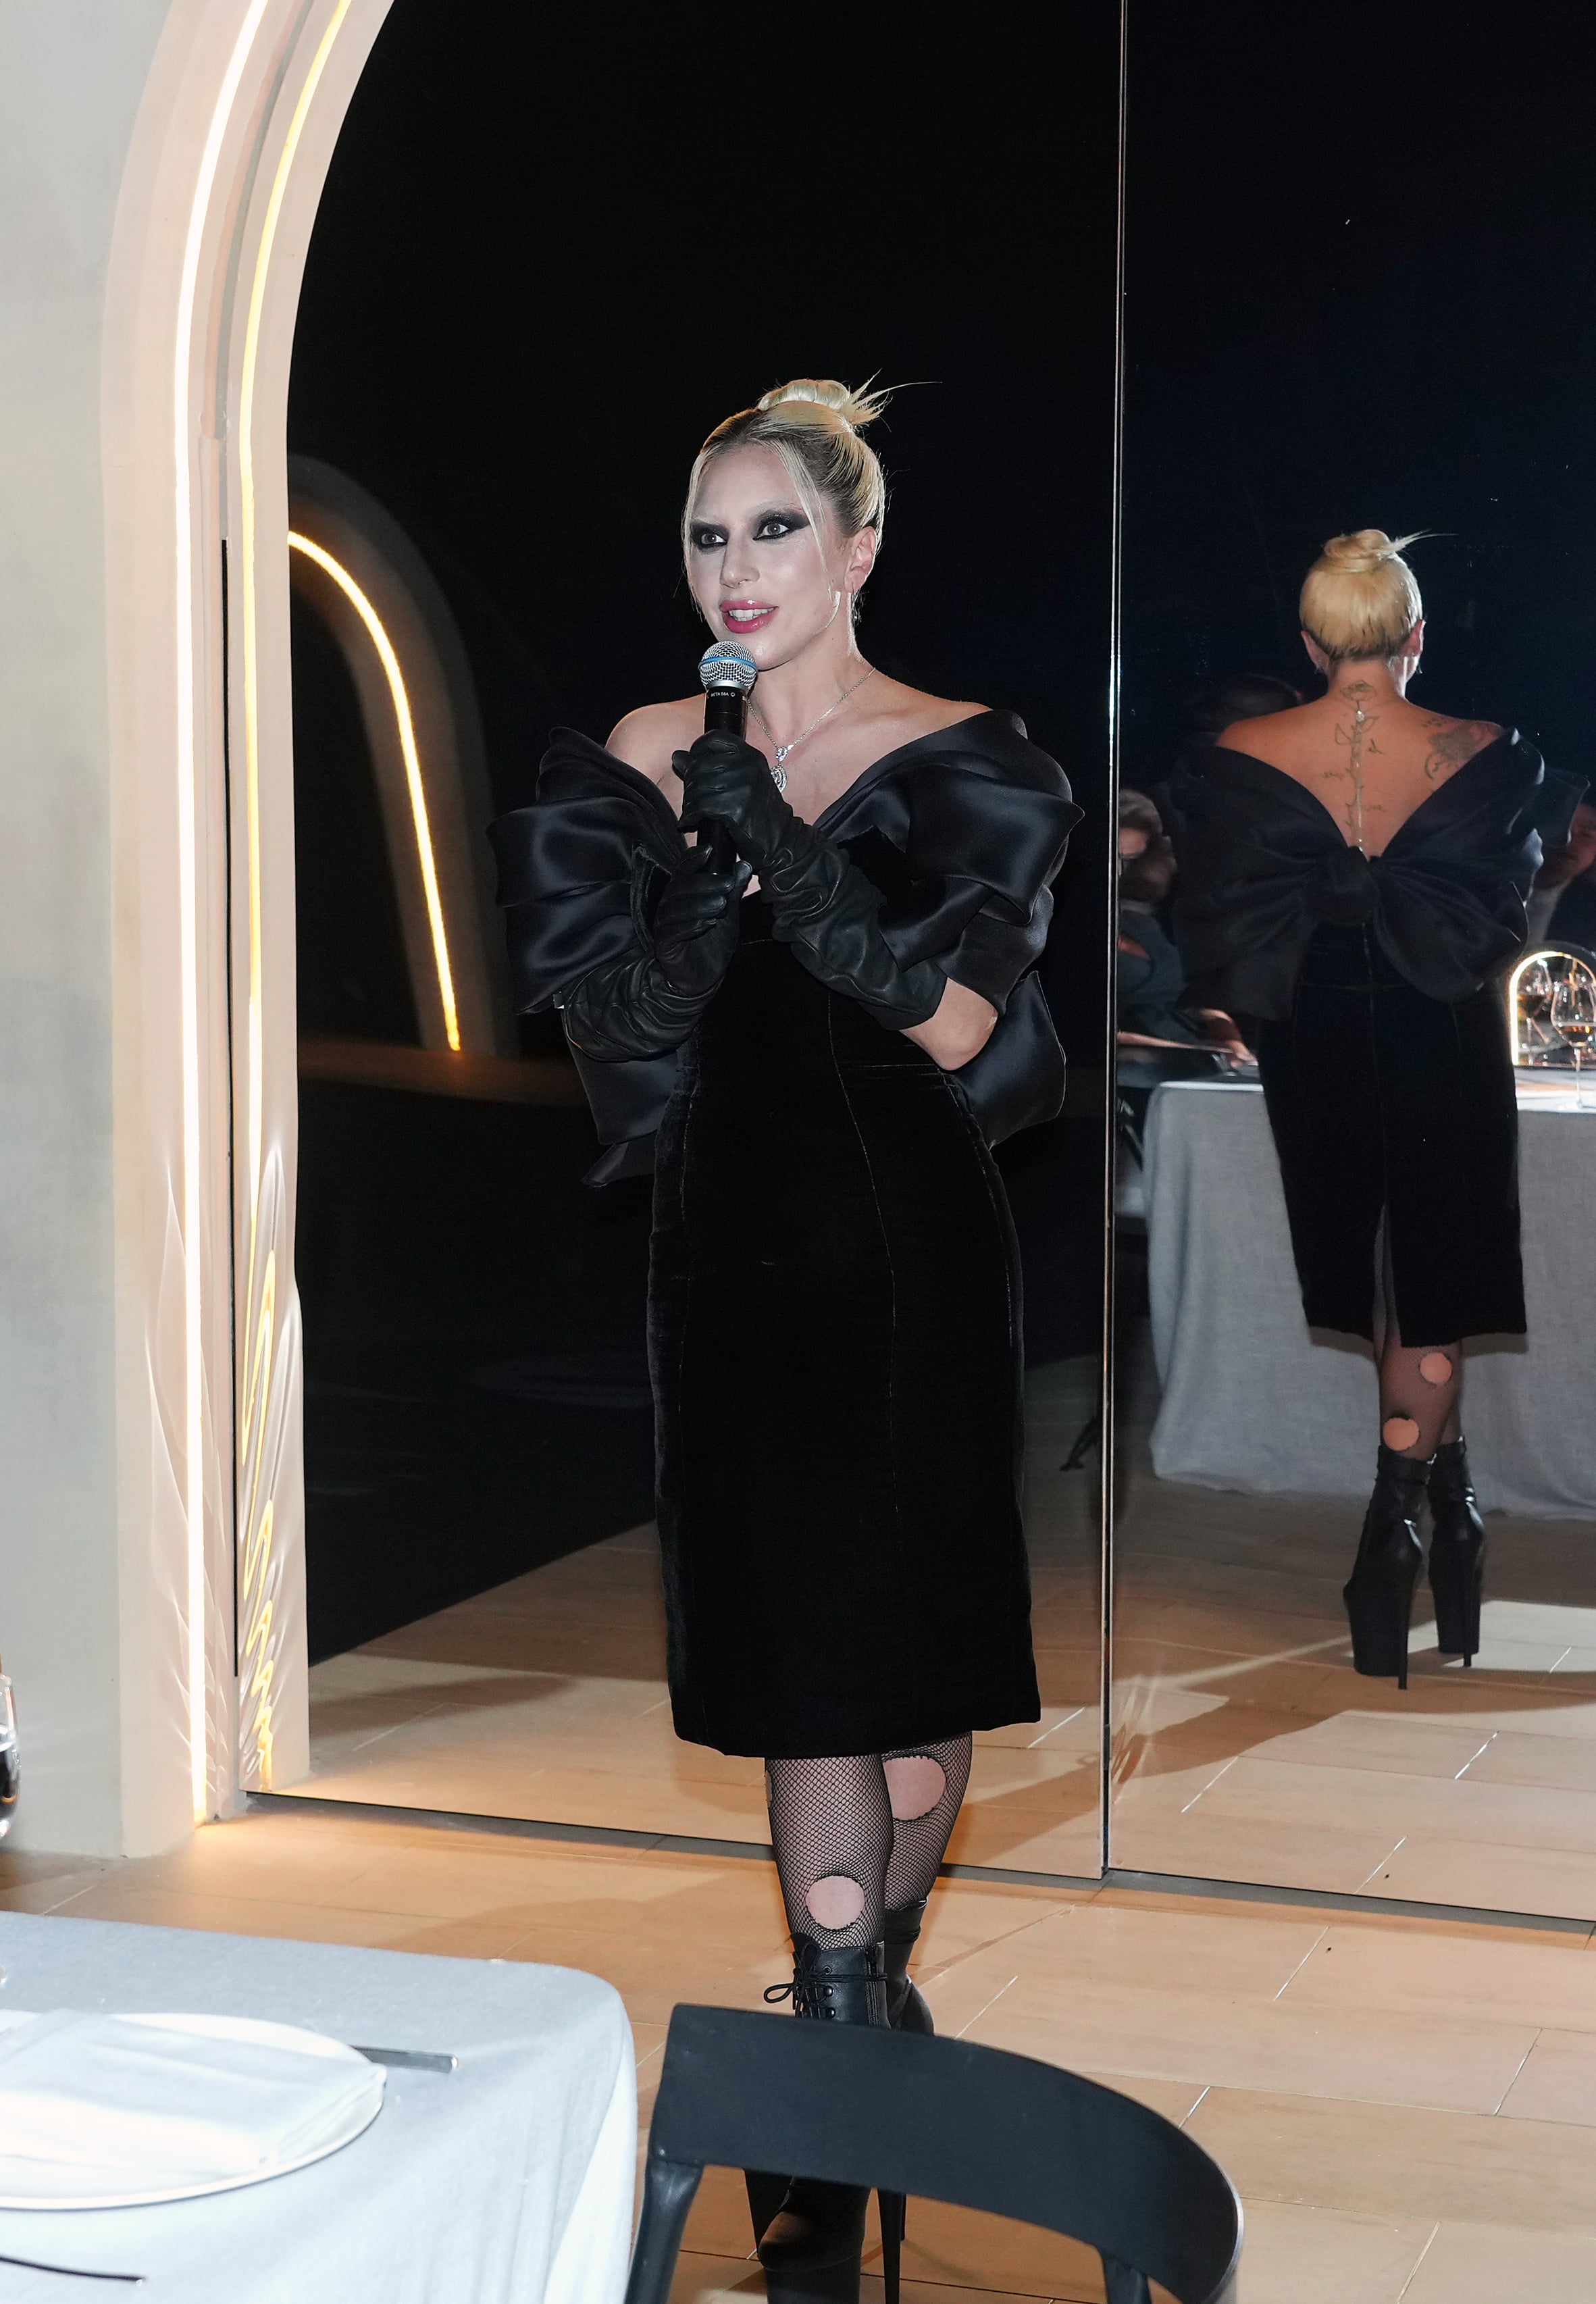 Lady Gaga Stuns In Ripped Fishnet To Dom Perignon Event: Photos